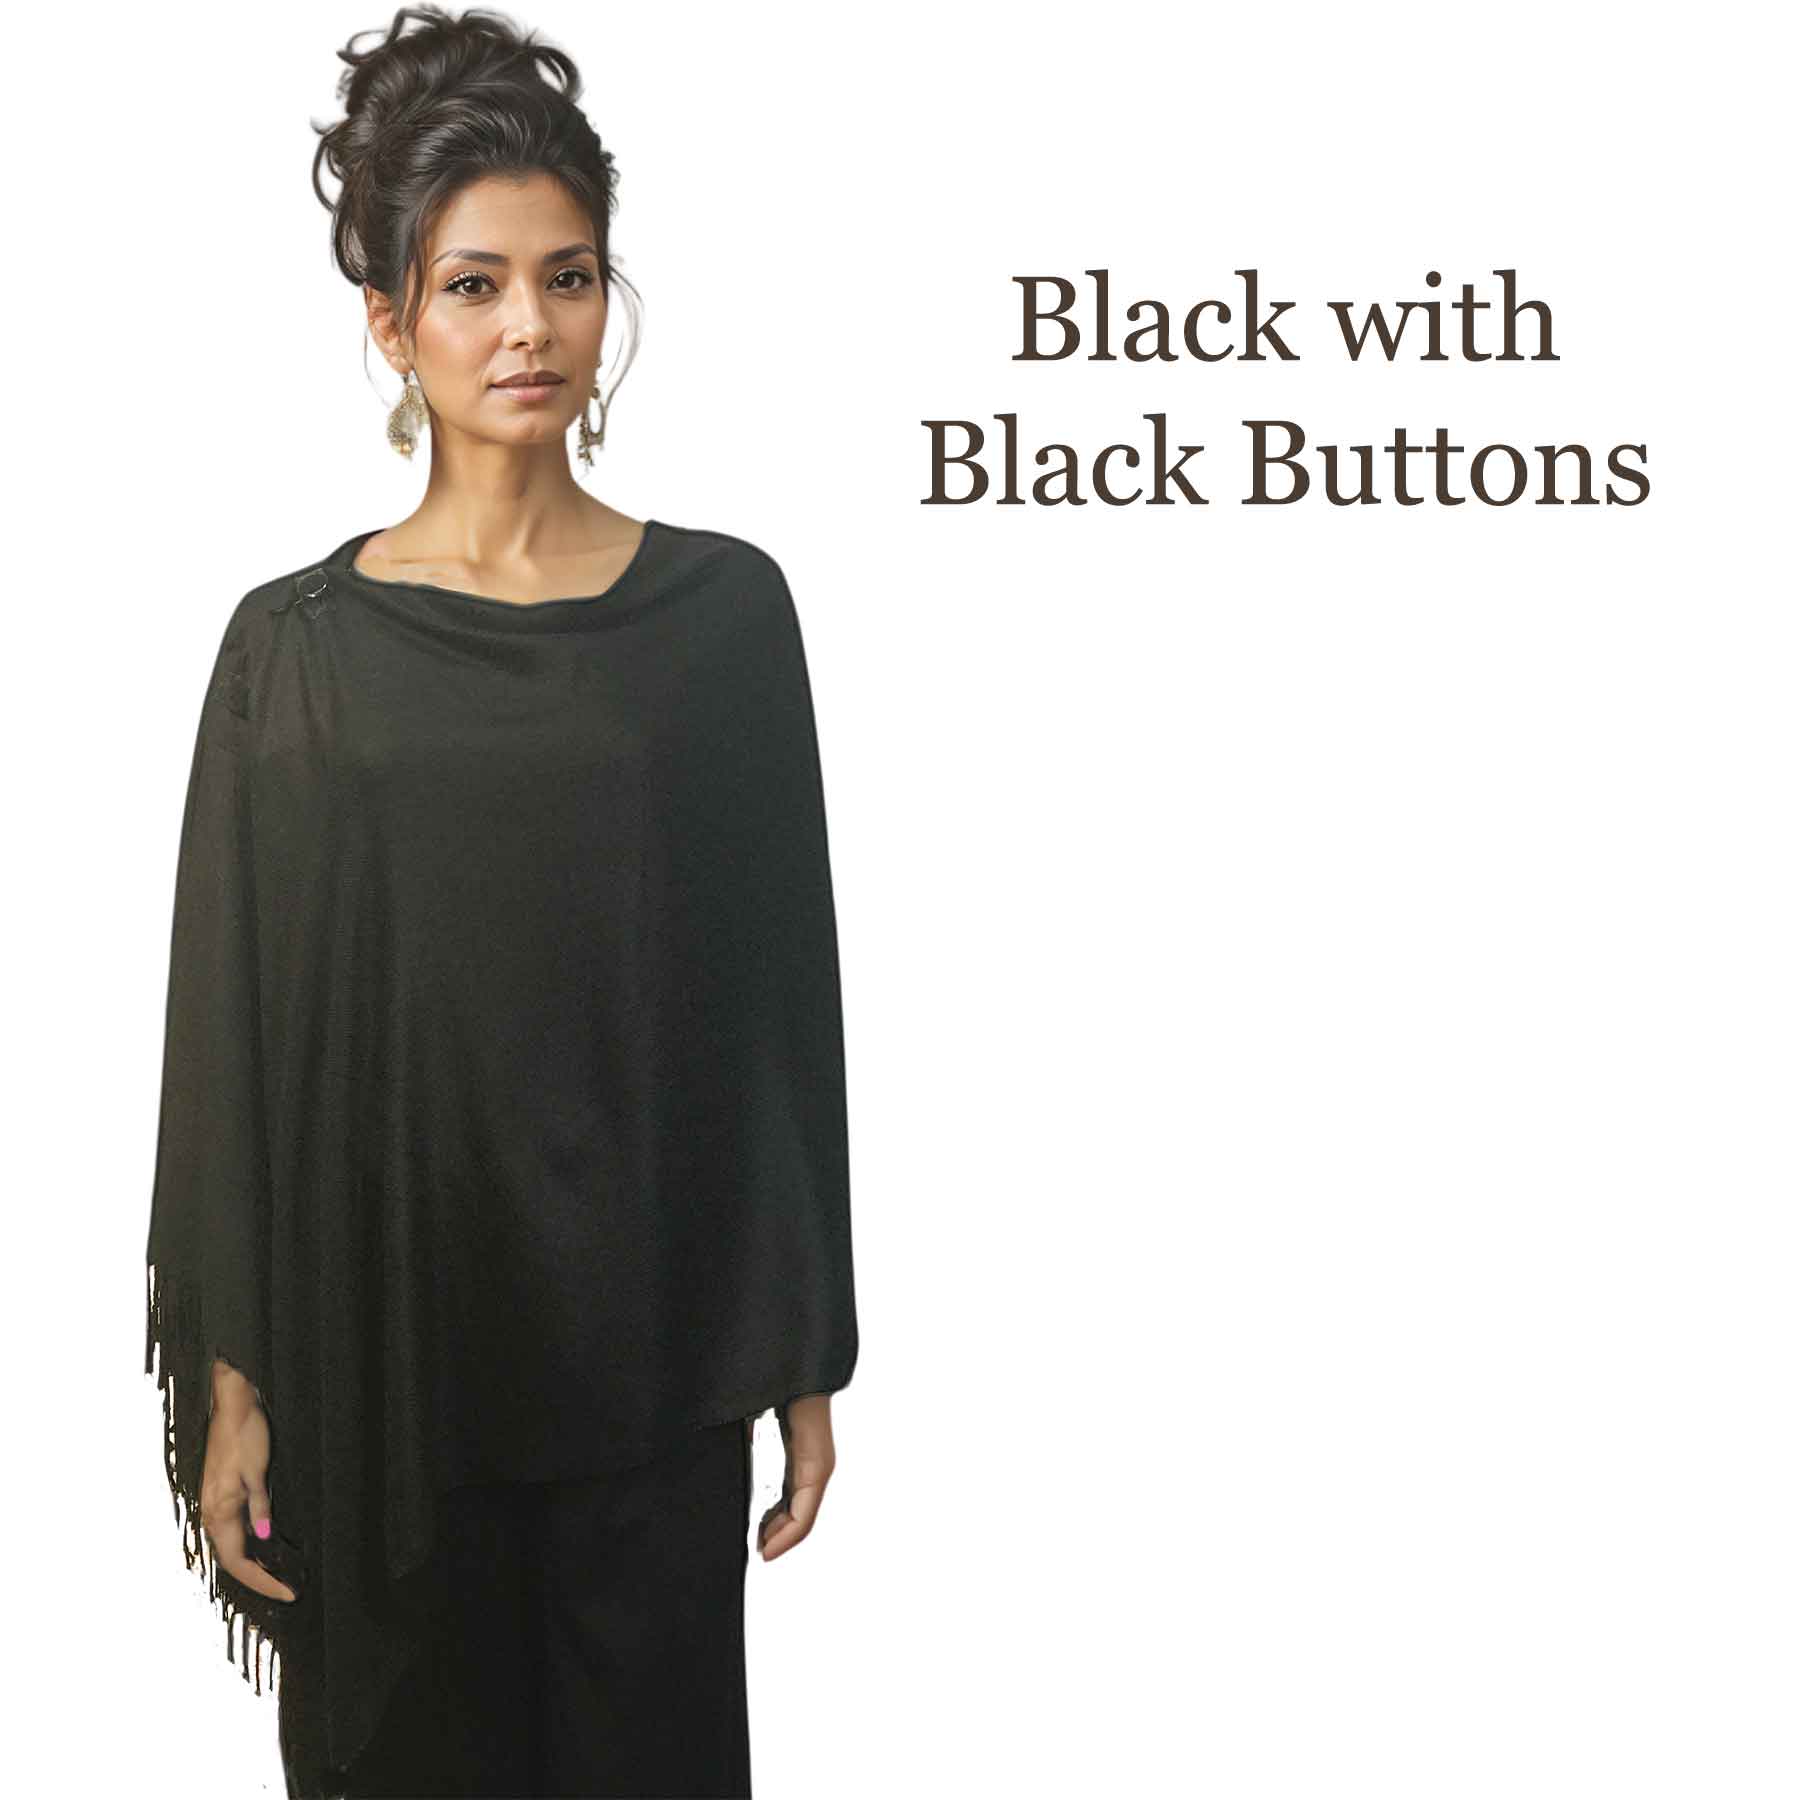 Solid Black<br>
Pashmina Style Button Shawl